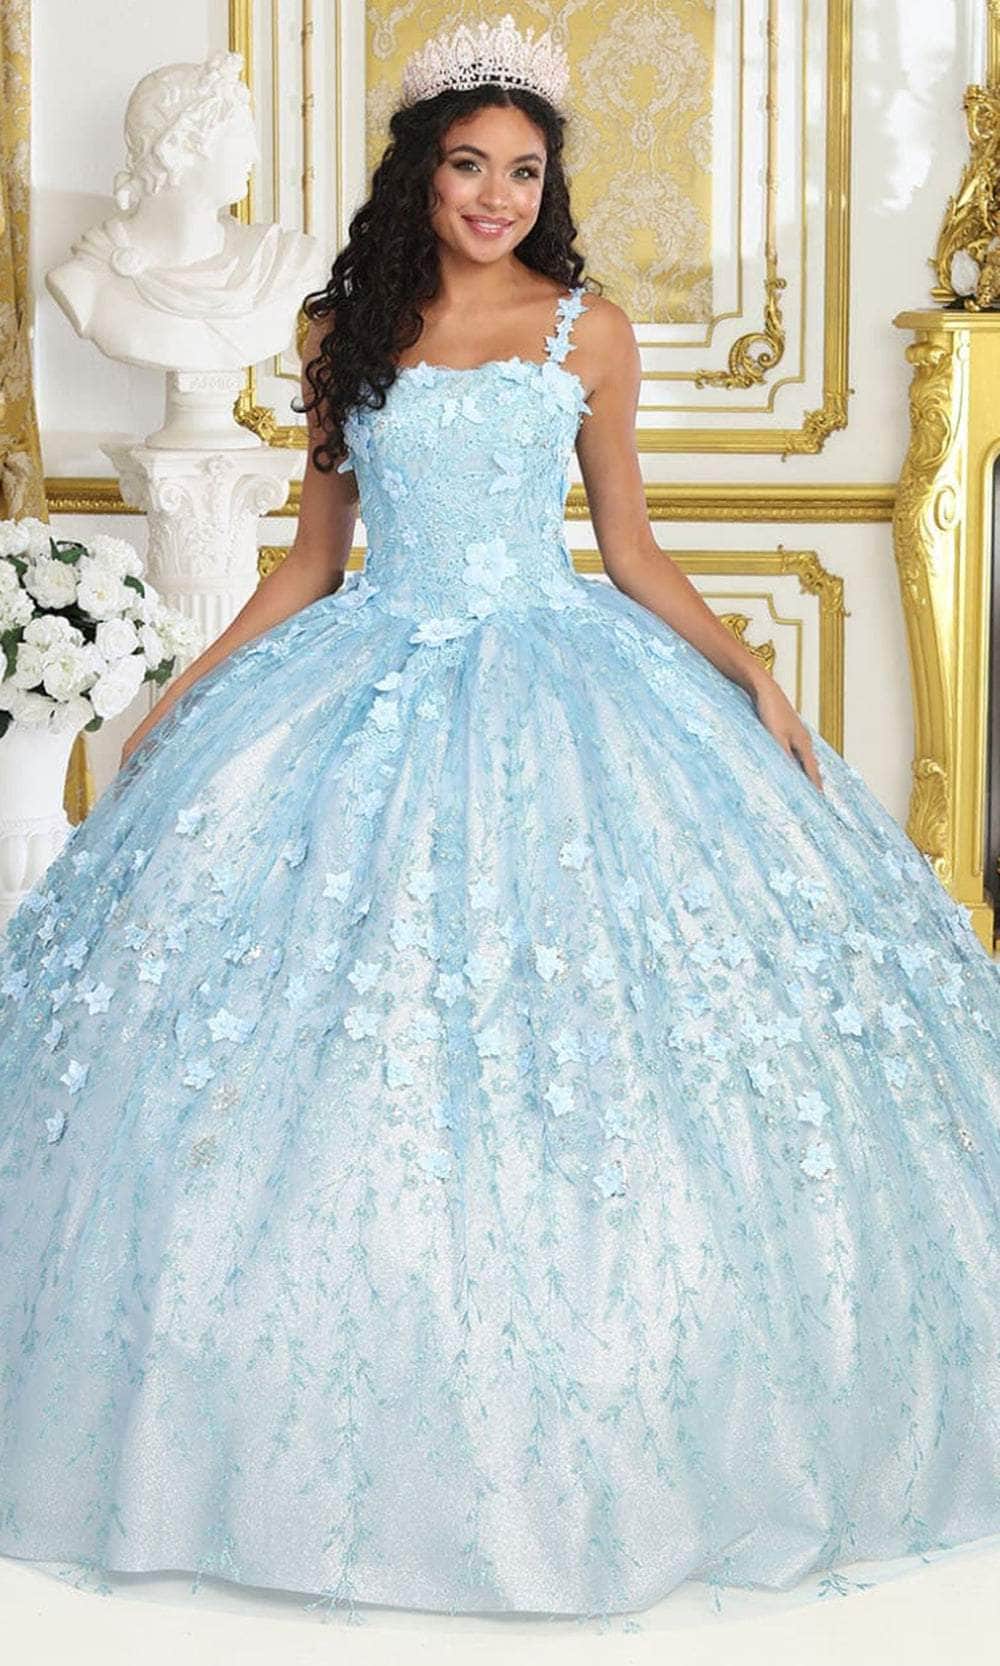 Image of May Queen LK208 - Floral Glitter Ballgown